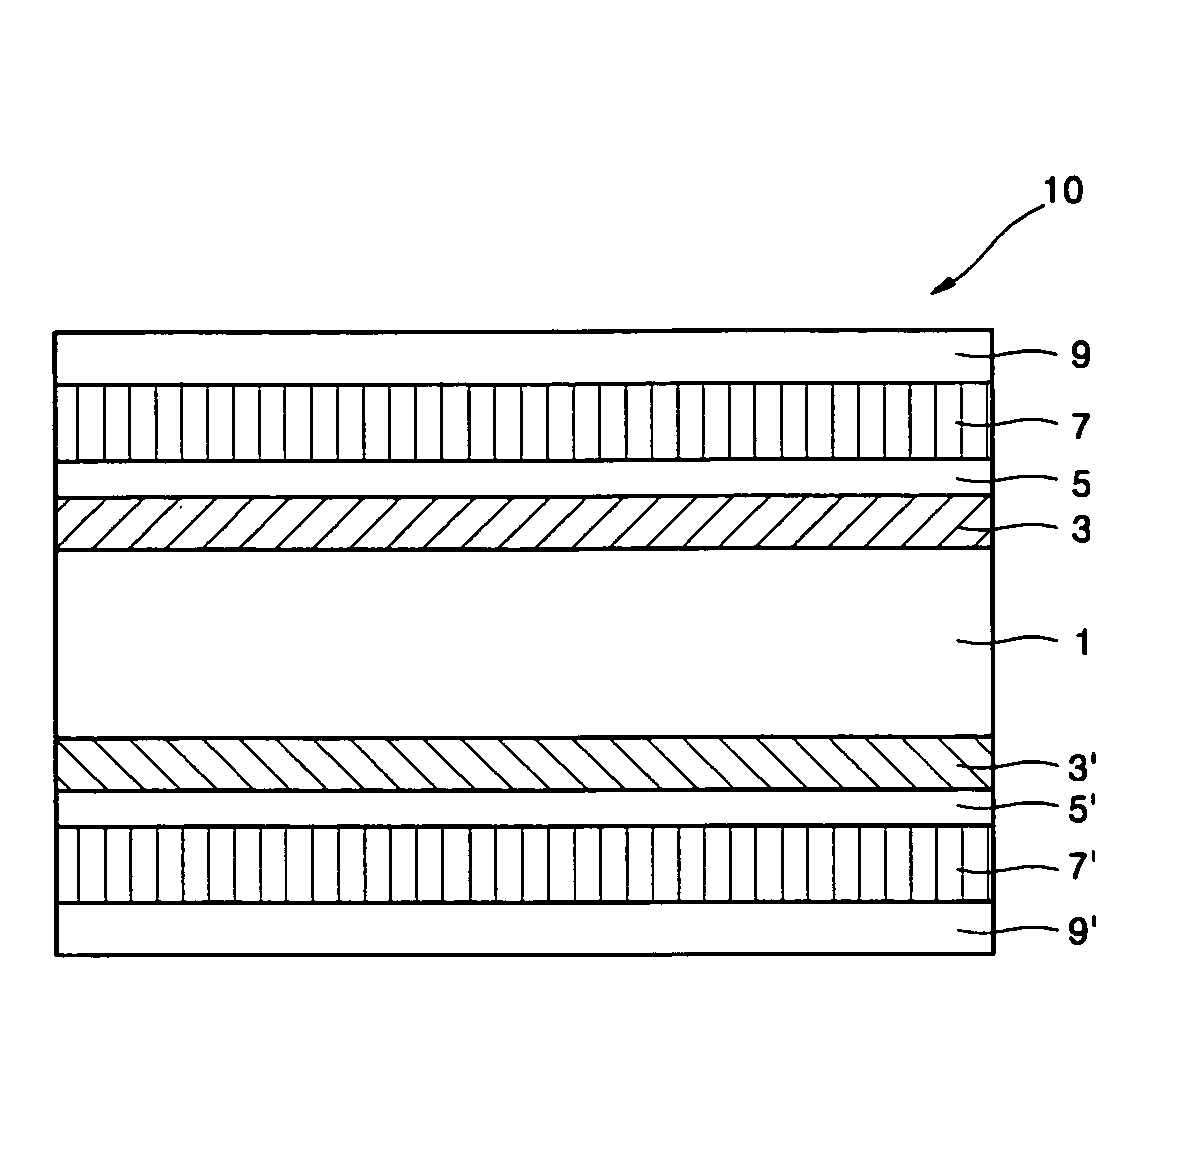 Biaxial-optical polynorbornene-based film and method of manufacturing the same, integrated optical compensation polarizer having the film and method of manufacturing the polarizer, and liquid crystal display panel containing the film and/or polarizer